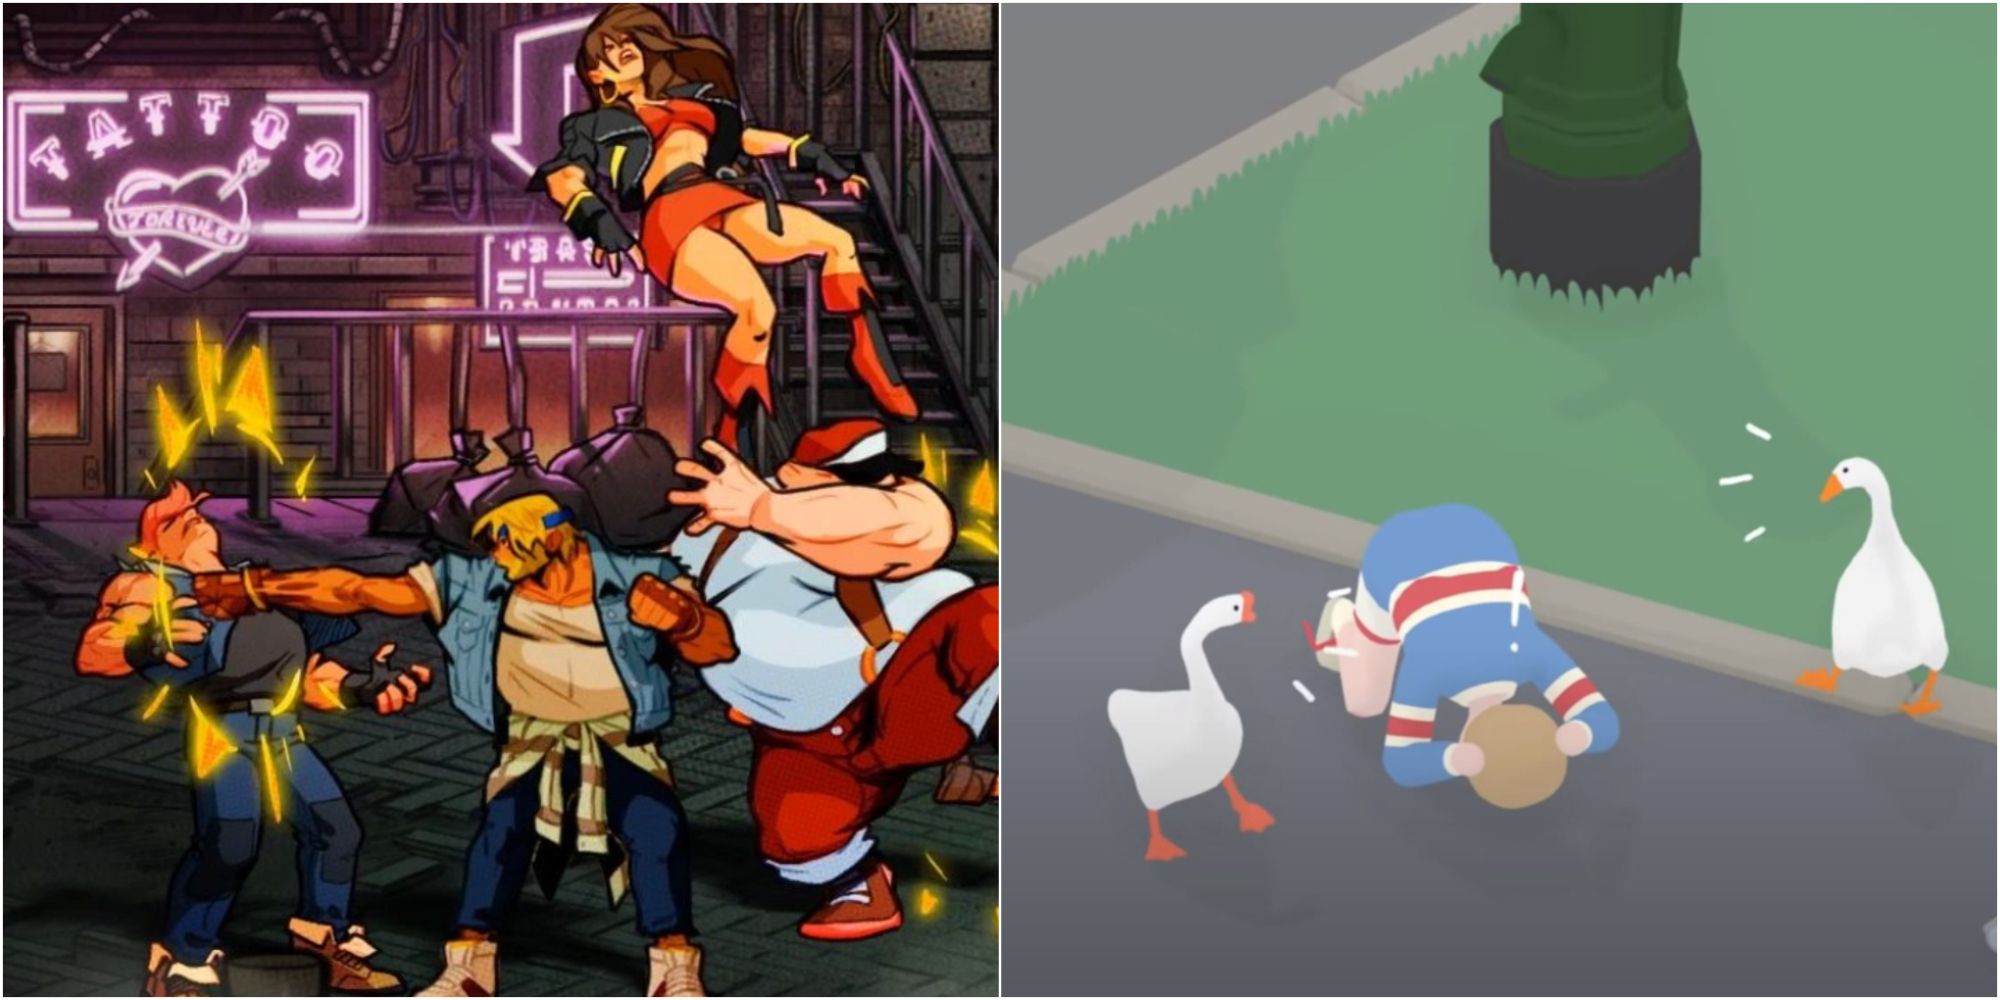 Short Co-op Games Featured Split Image Streets Of Rage 4 and Untitled Goose Game